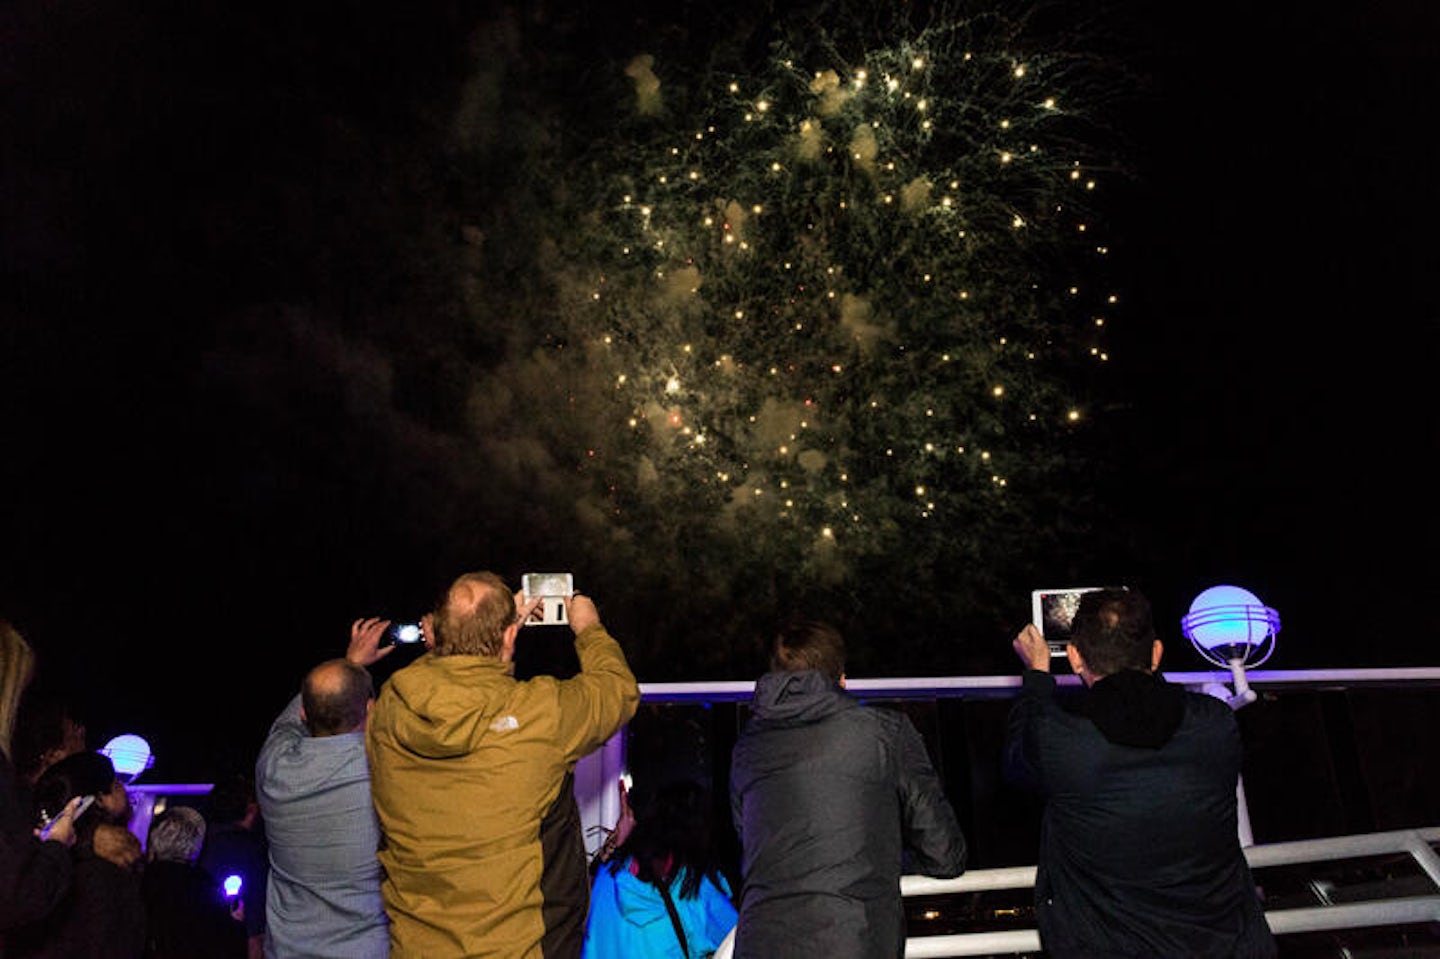 Fireworks from the Ship on Norwegian Jade